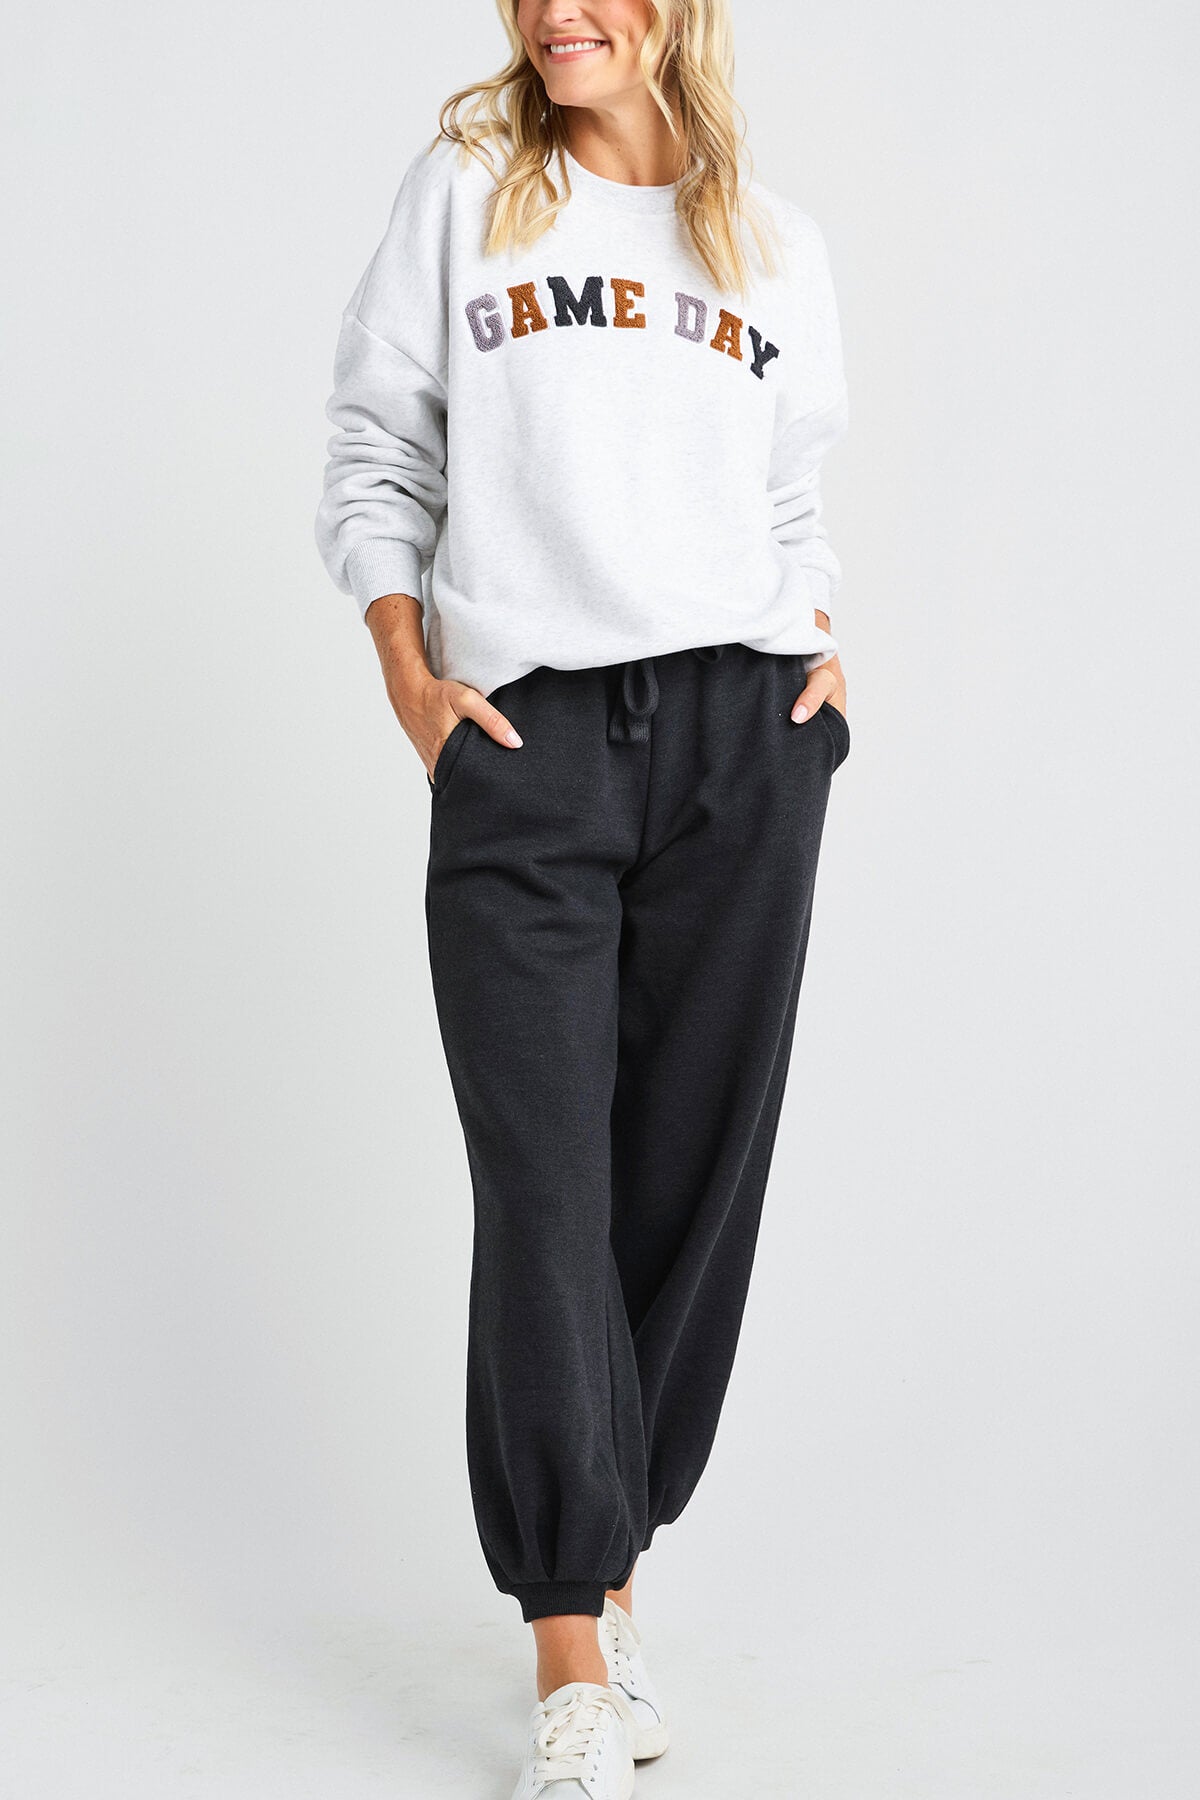  Women Cute Relaxed Fit Joggers Lounge Pants Sweatpants